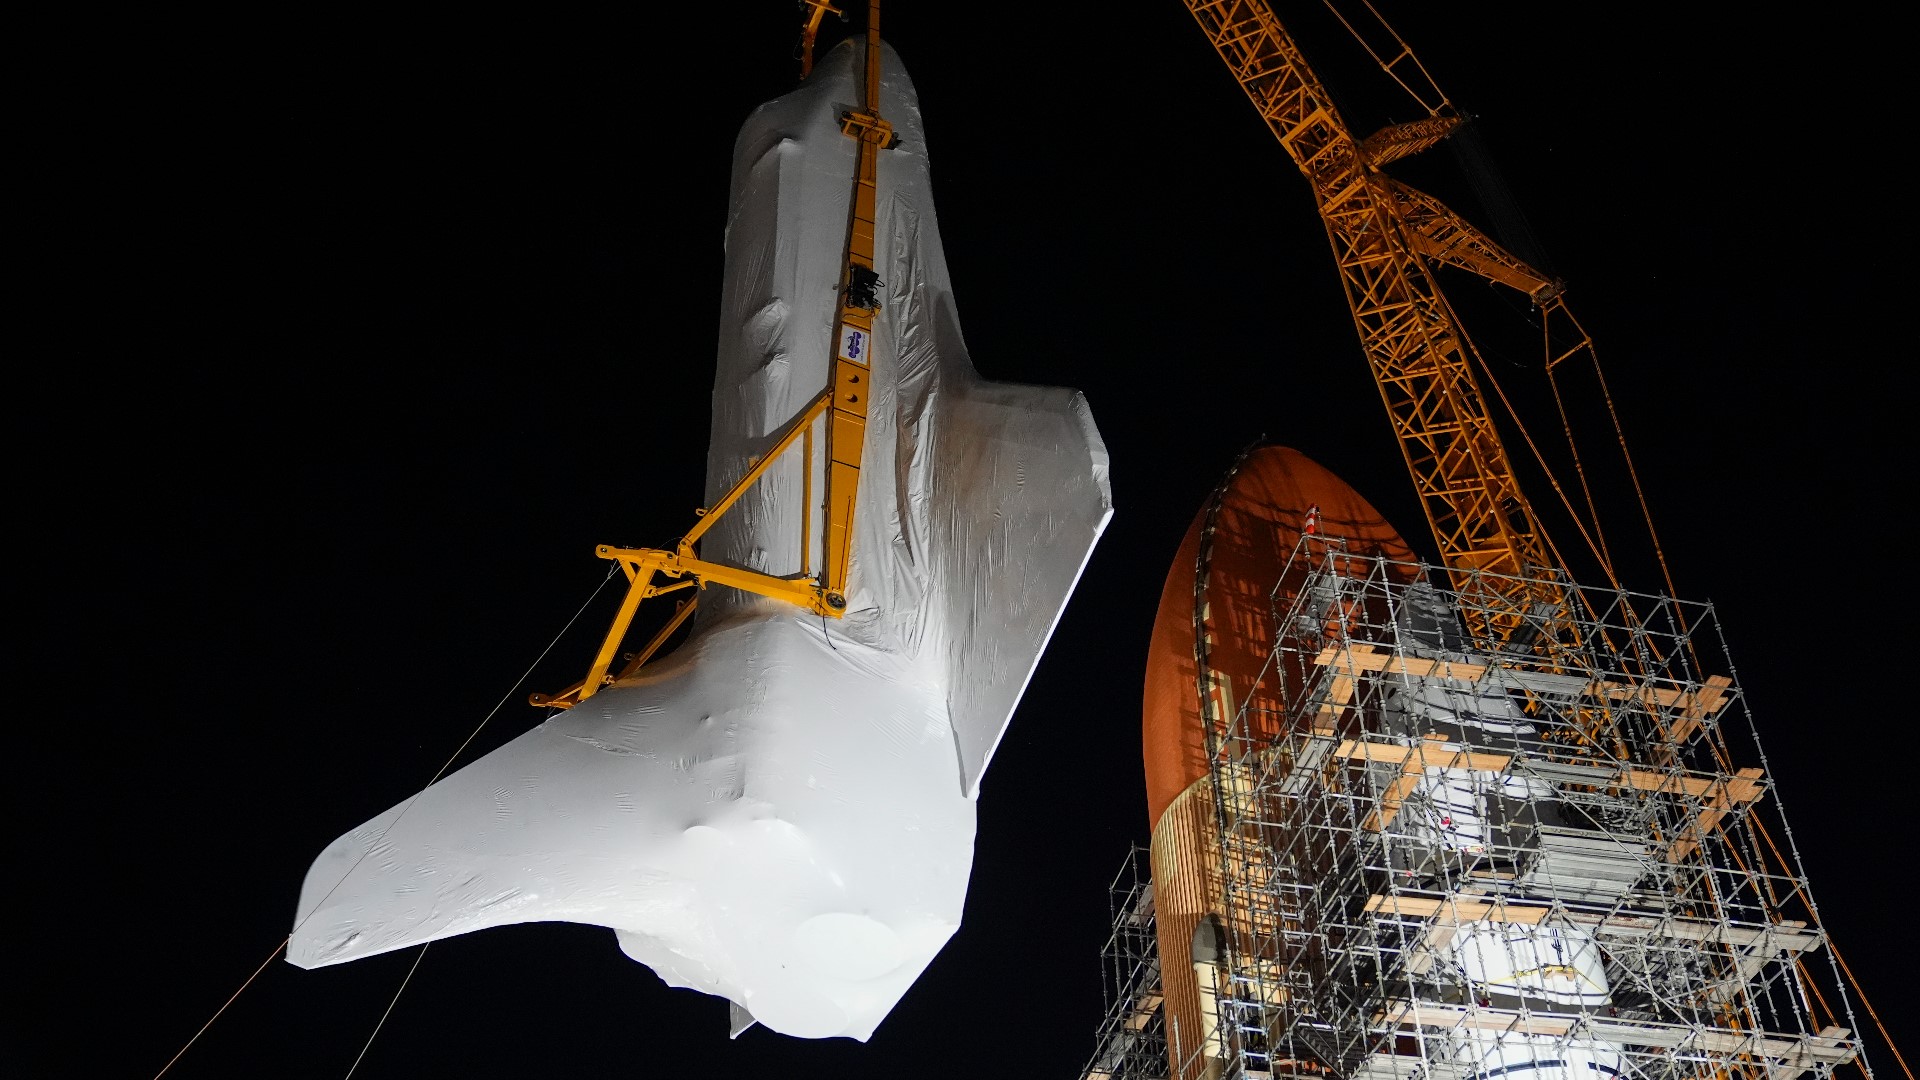 NASA's retired Space Shuttle Endeavour was carefully hoisted late Monday in Los Angeles to where it will be uniquely displayed as if it is about to blast off.